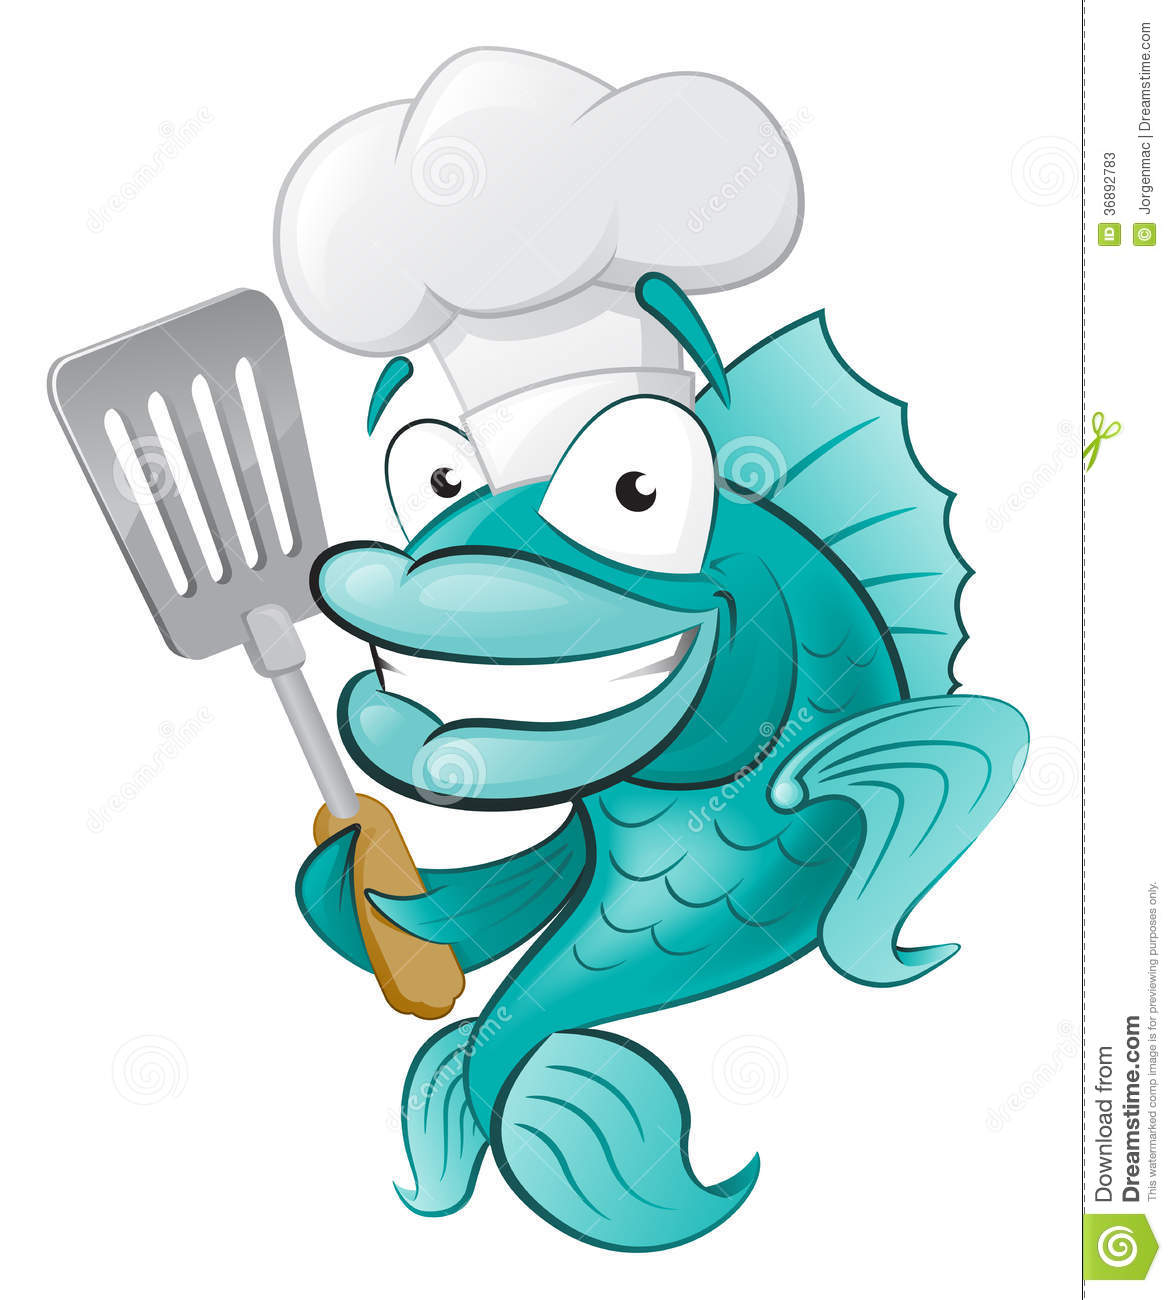 Great Illustration Of A Cute Cartoon Cod Fish Chef Holding A Frying